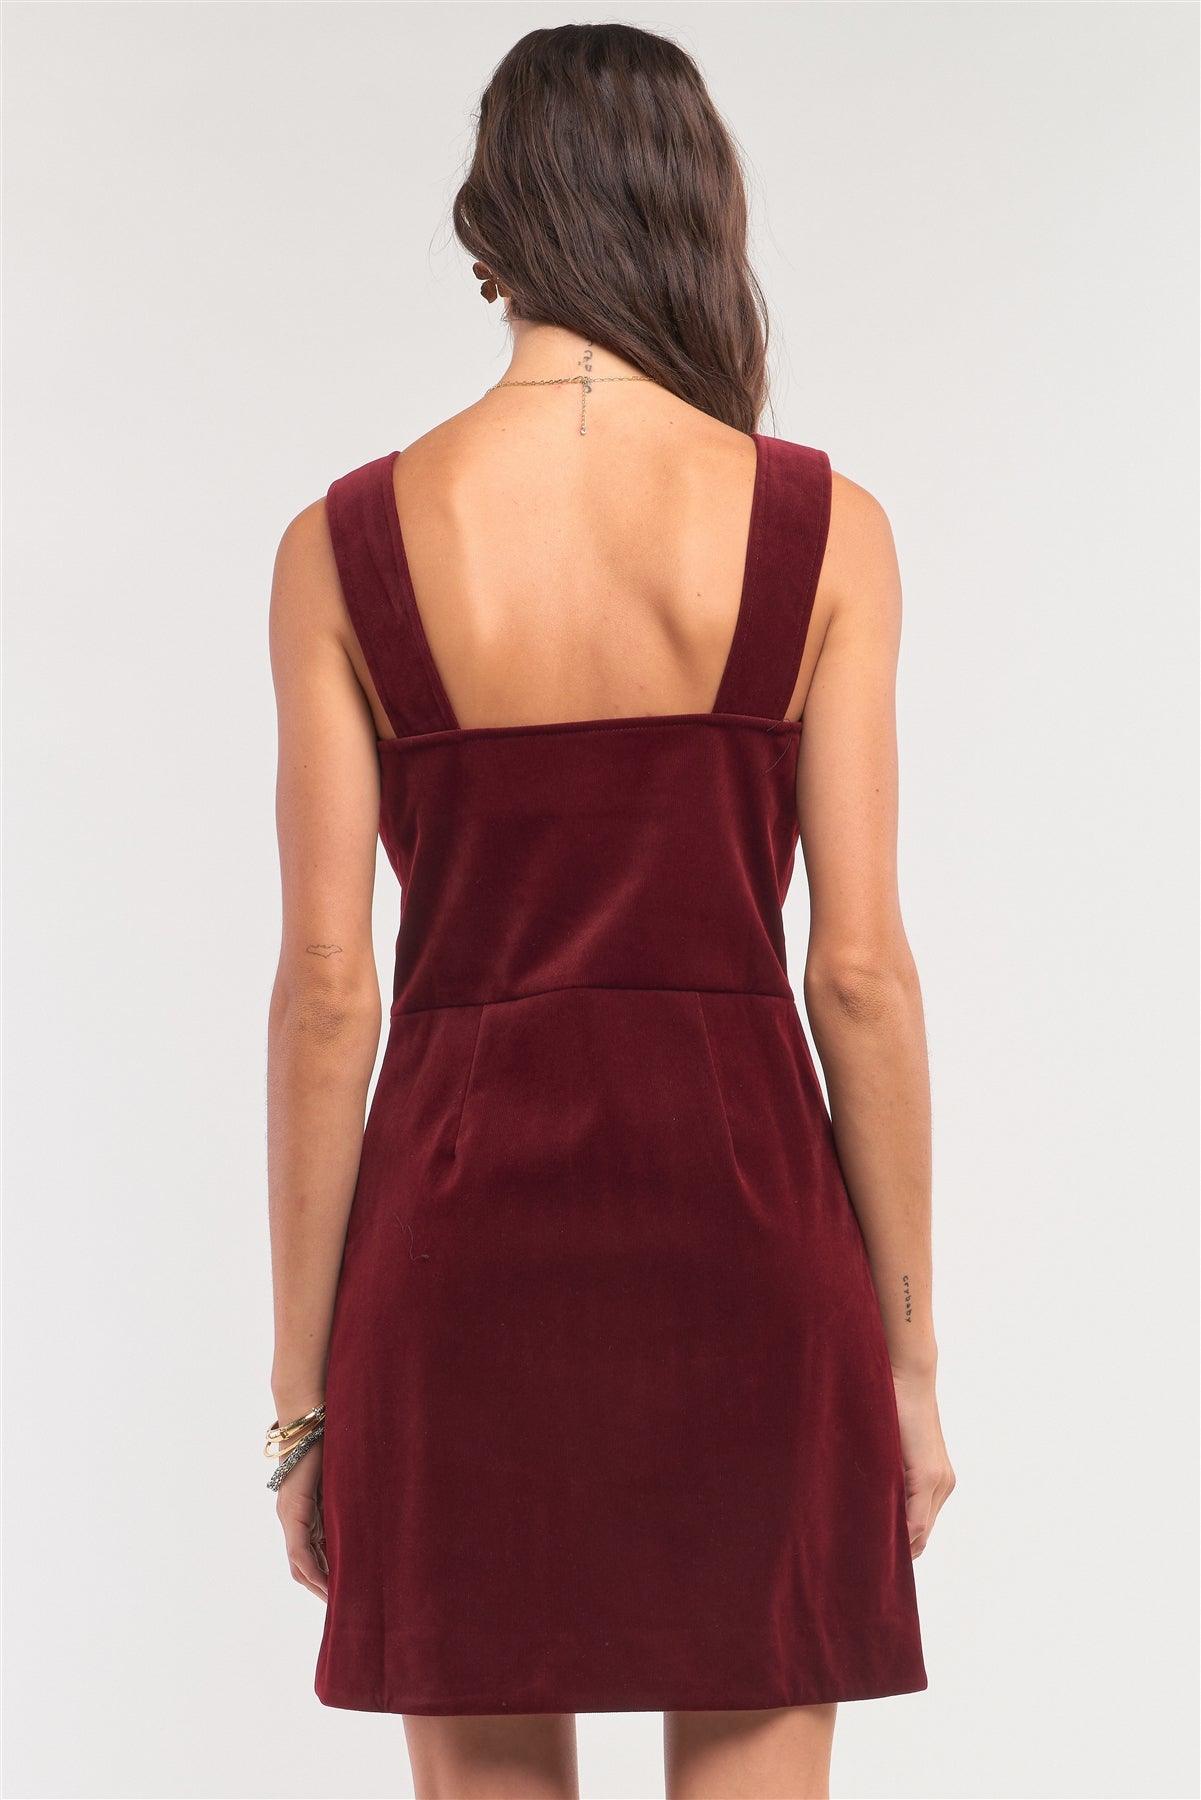 Cranberry Red Corduroy Sleeveless Double Breasted Mini Dress /1-2-2-1